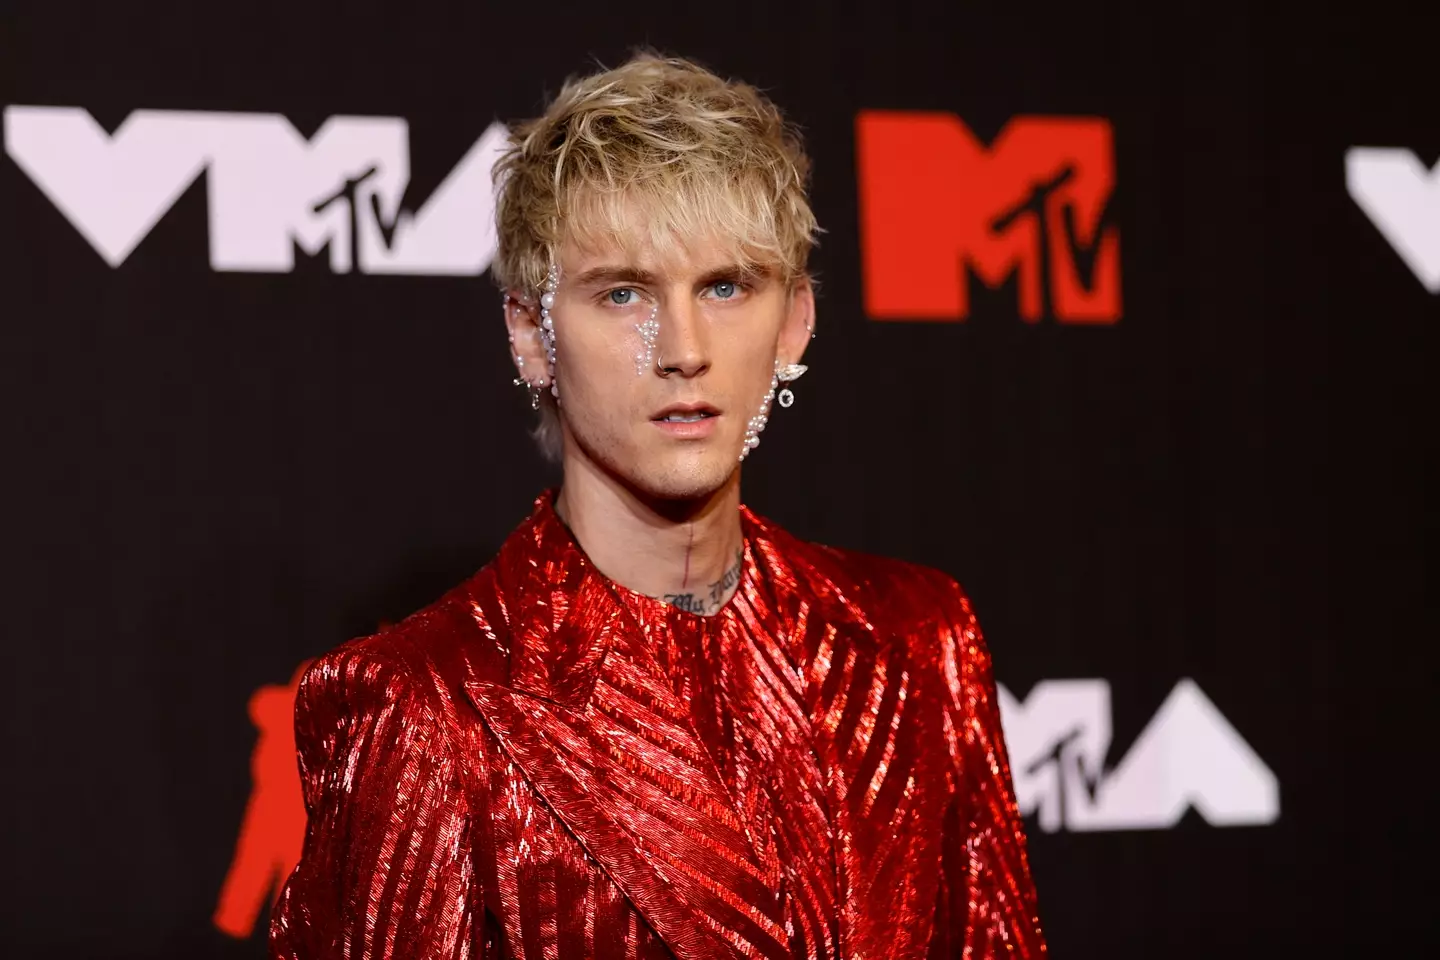 This is the artist formerly known as Machine Gun Kelly, now he's got a new name.